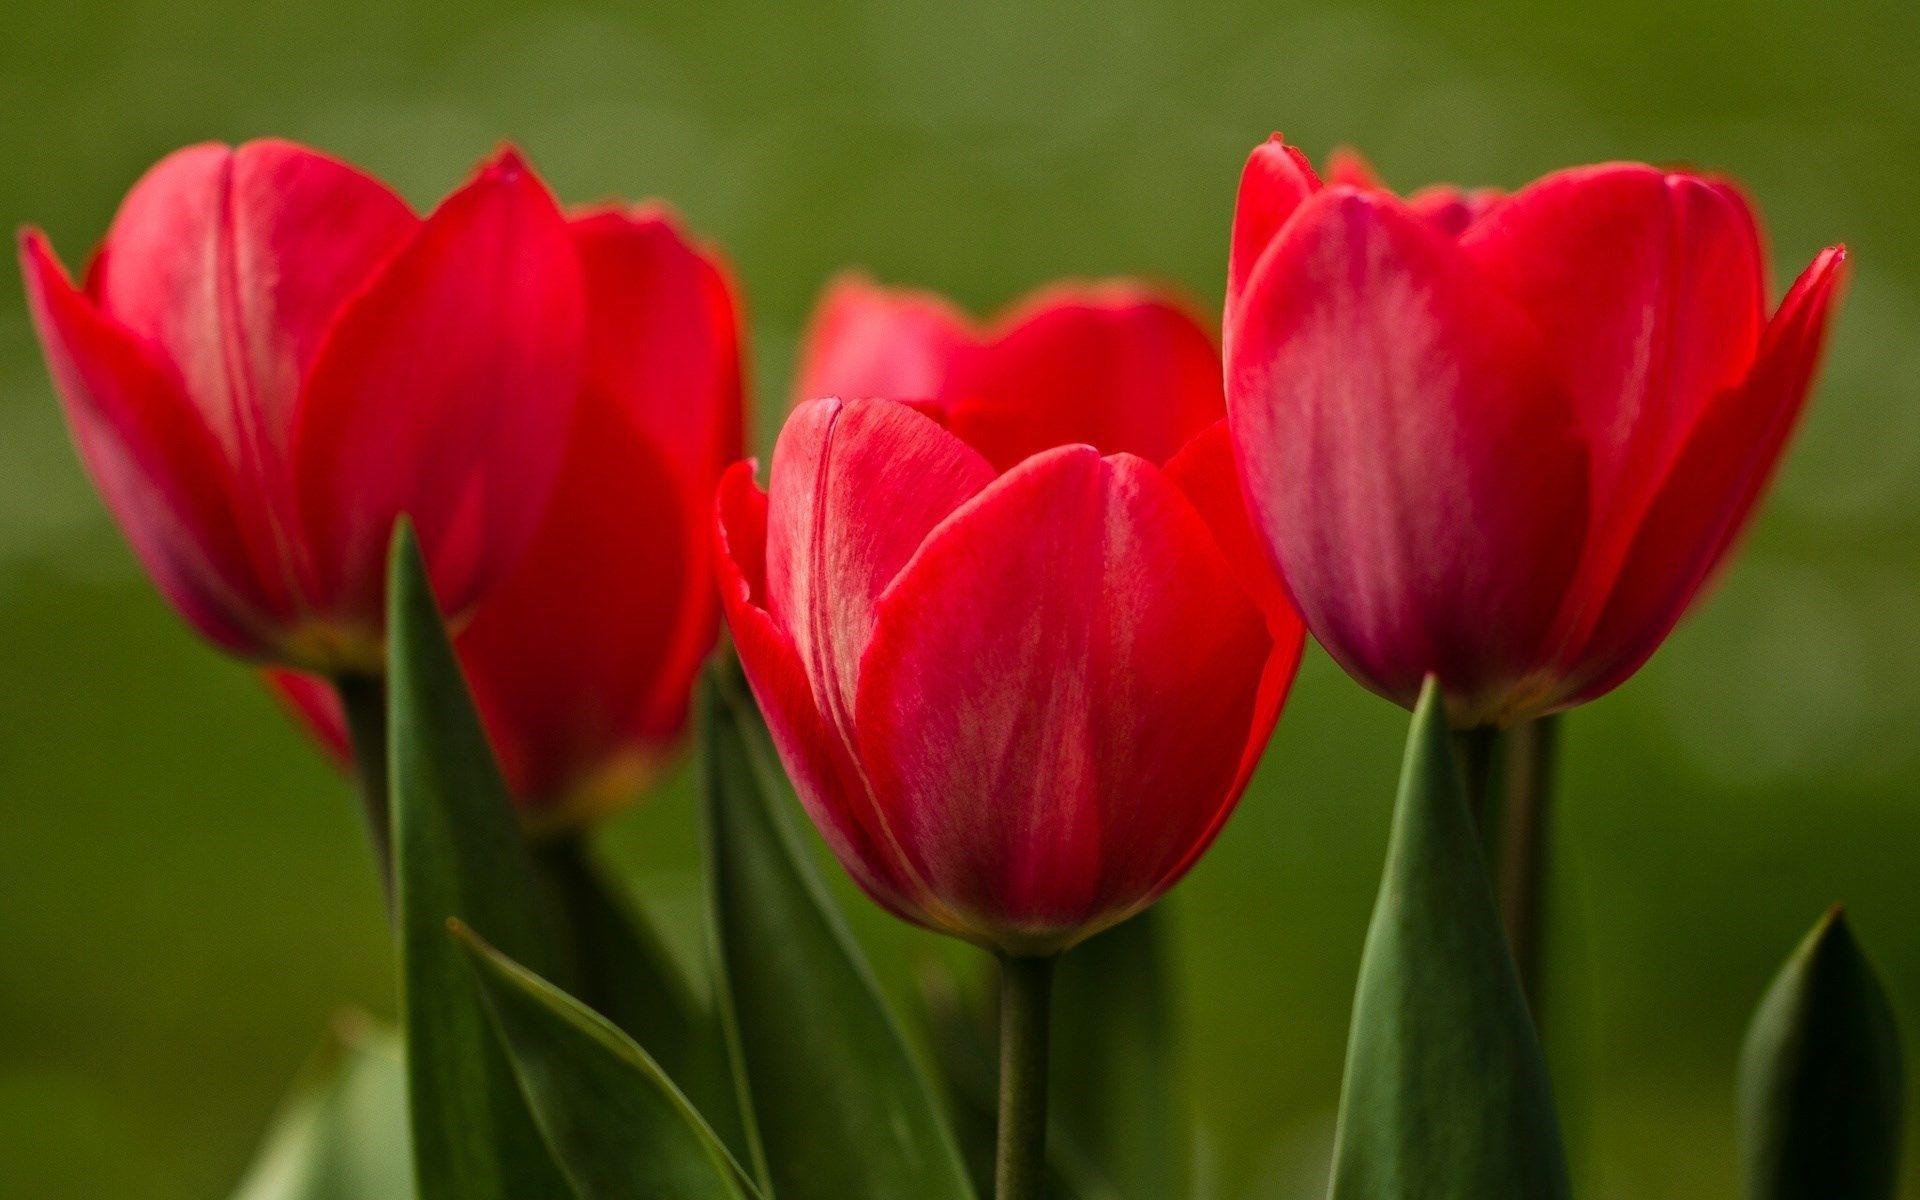 Red Tulips Wallpaper 19878 1920x1200 px